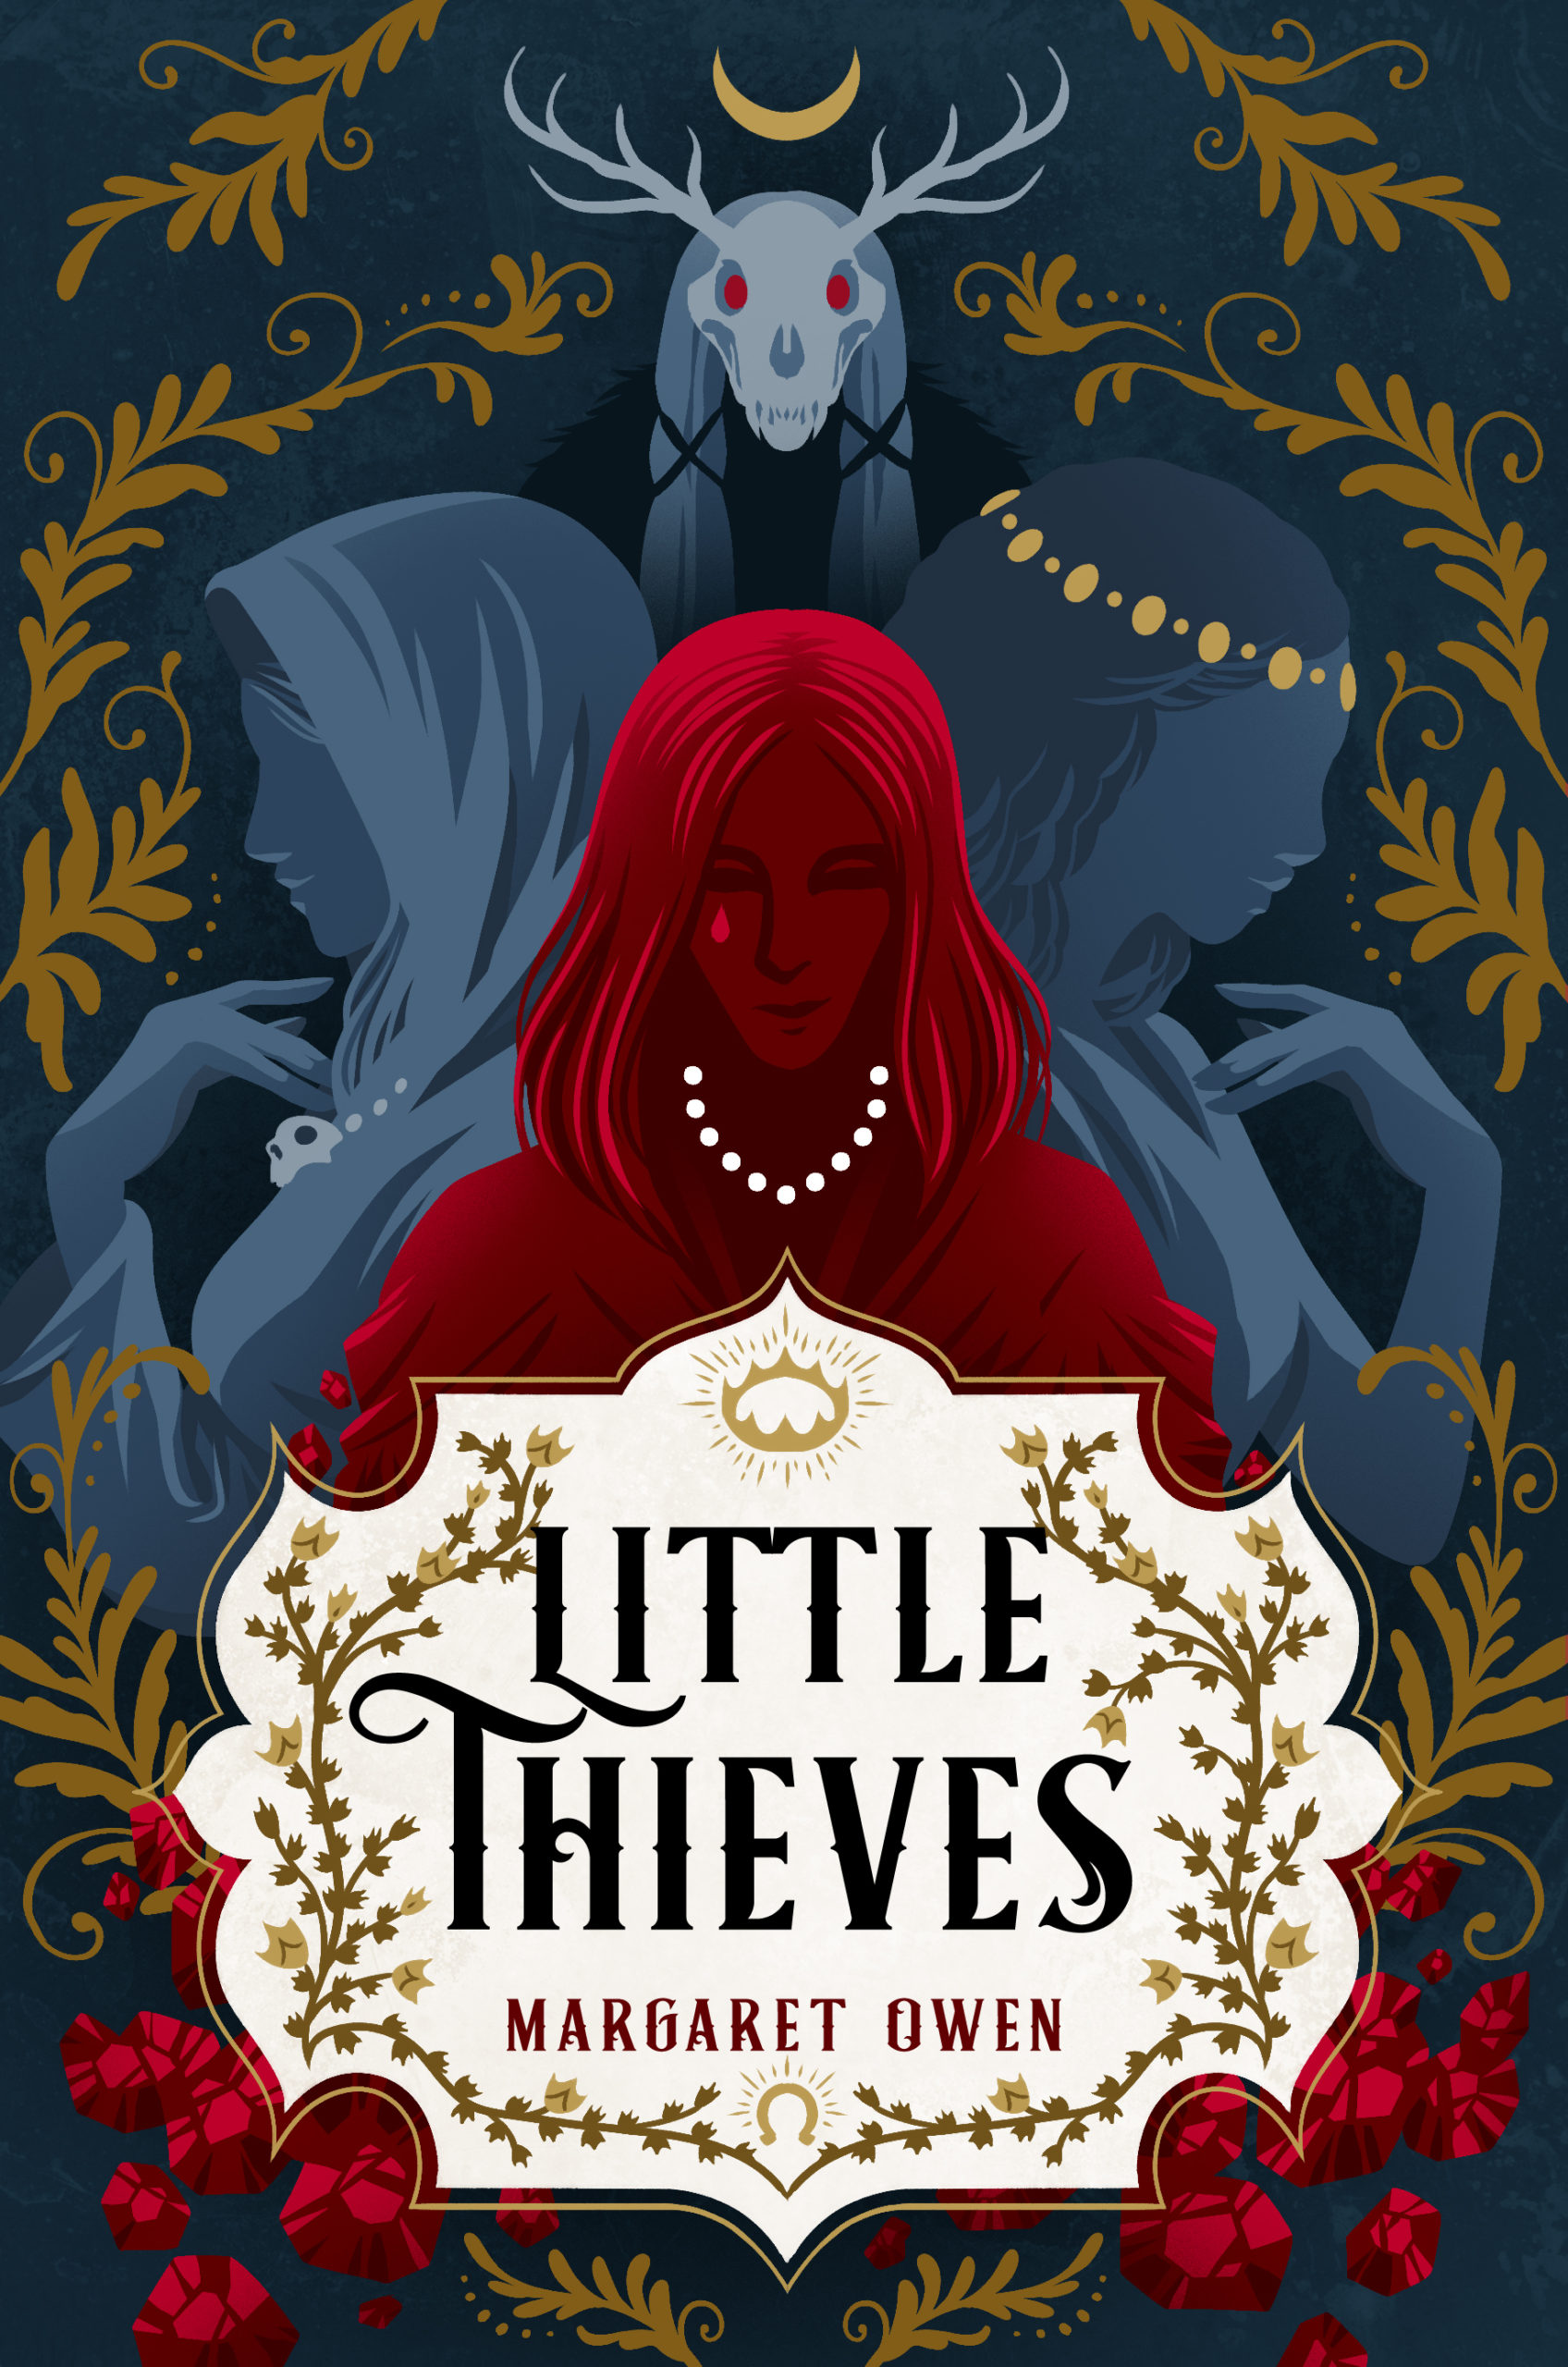 little thieves book cover - part of a set of images for heist squad characters blog post